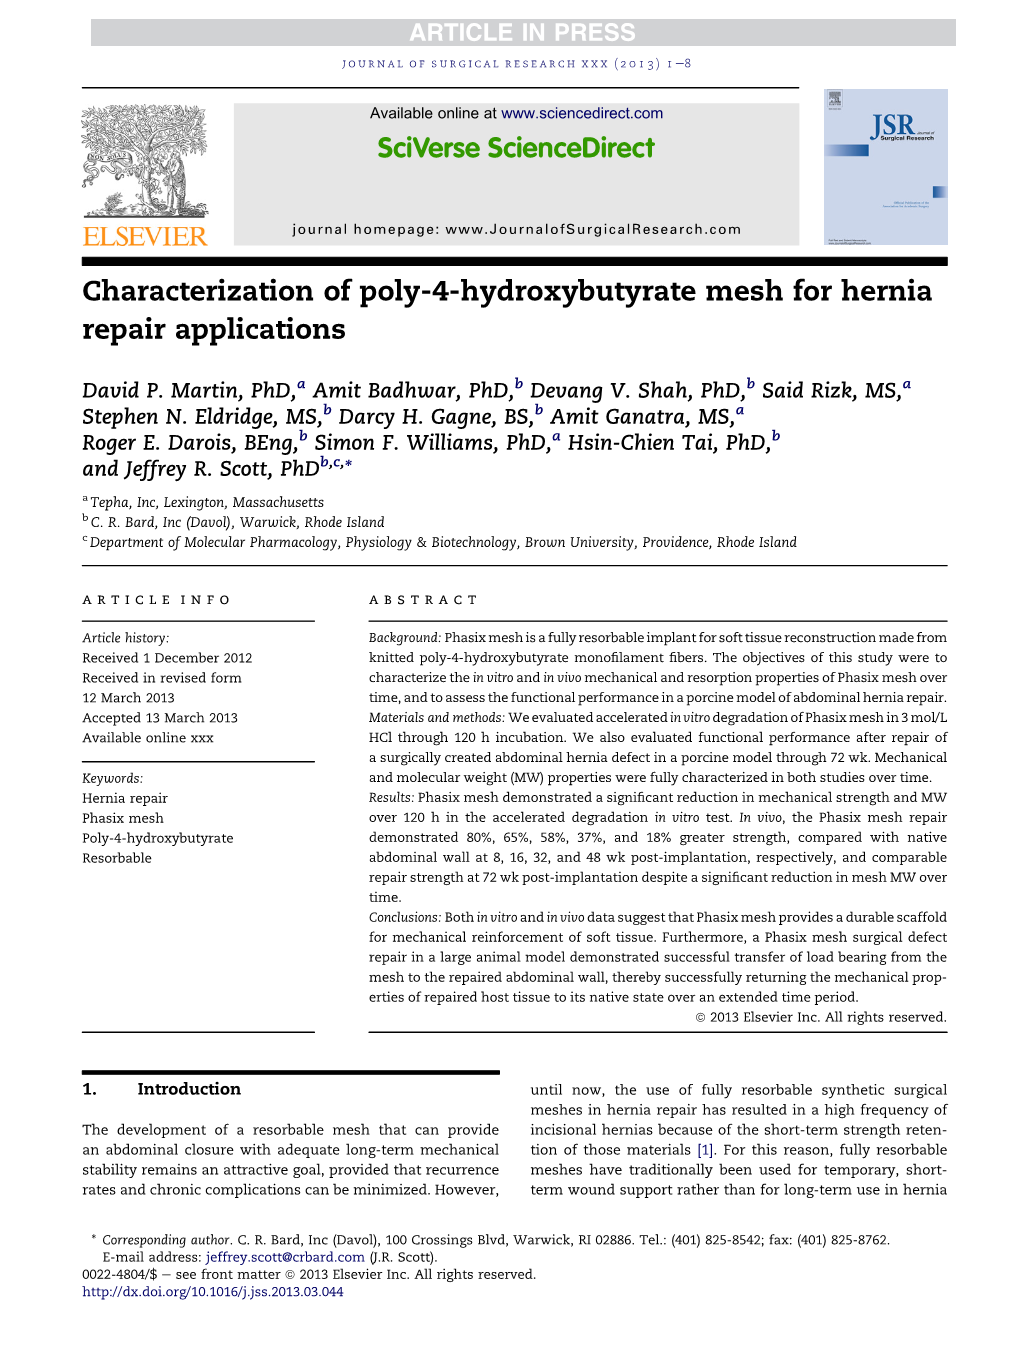 Characterization of Poly-4-Hydroxybutyrate Mesh for Hernia Repair Applications